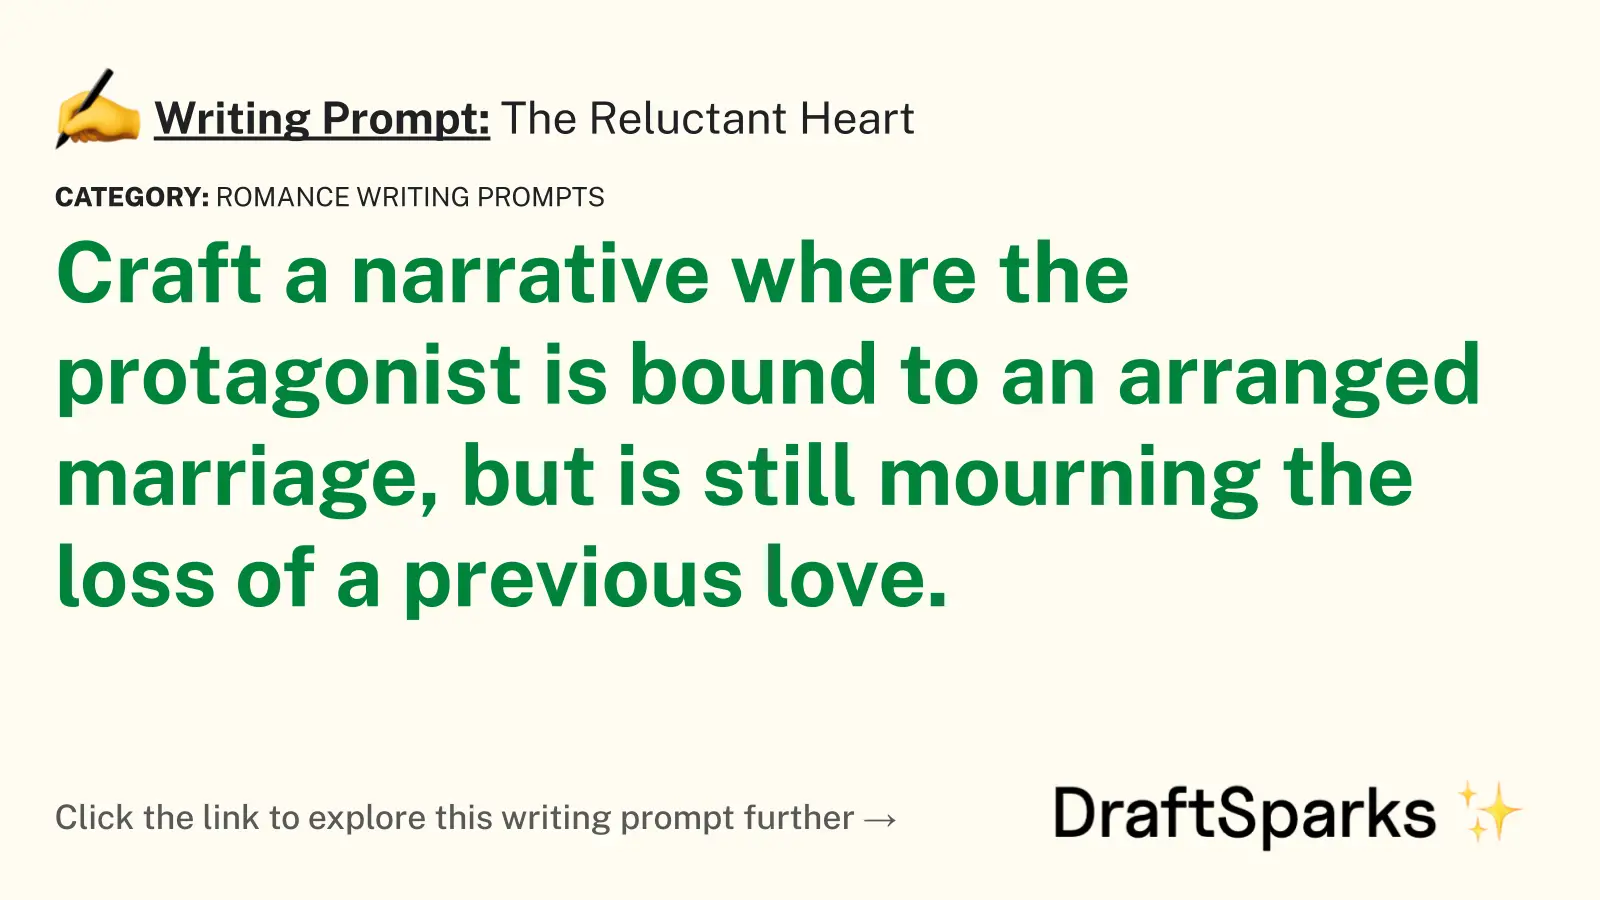 The Reluctant Heart